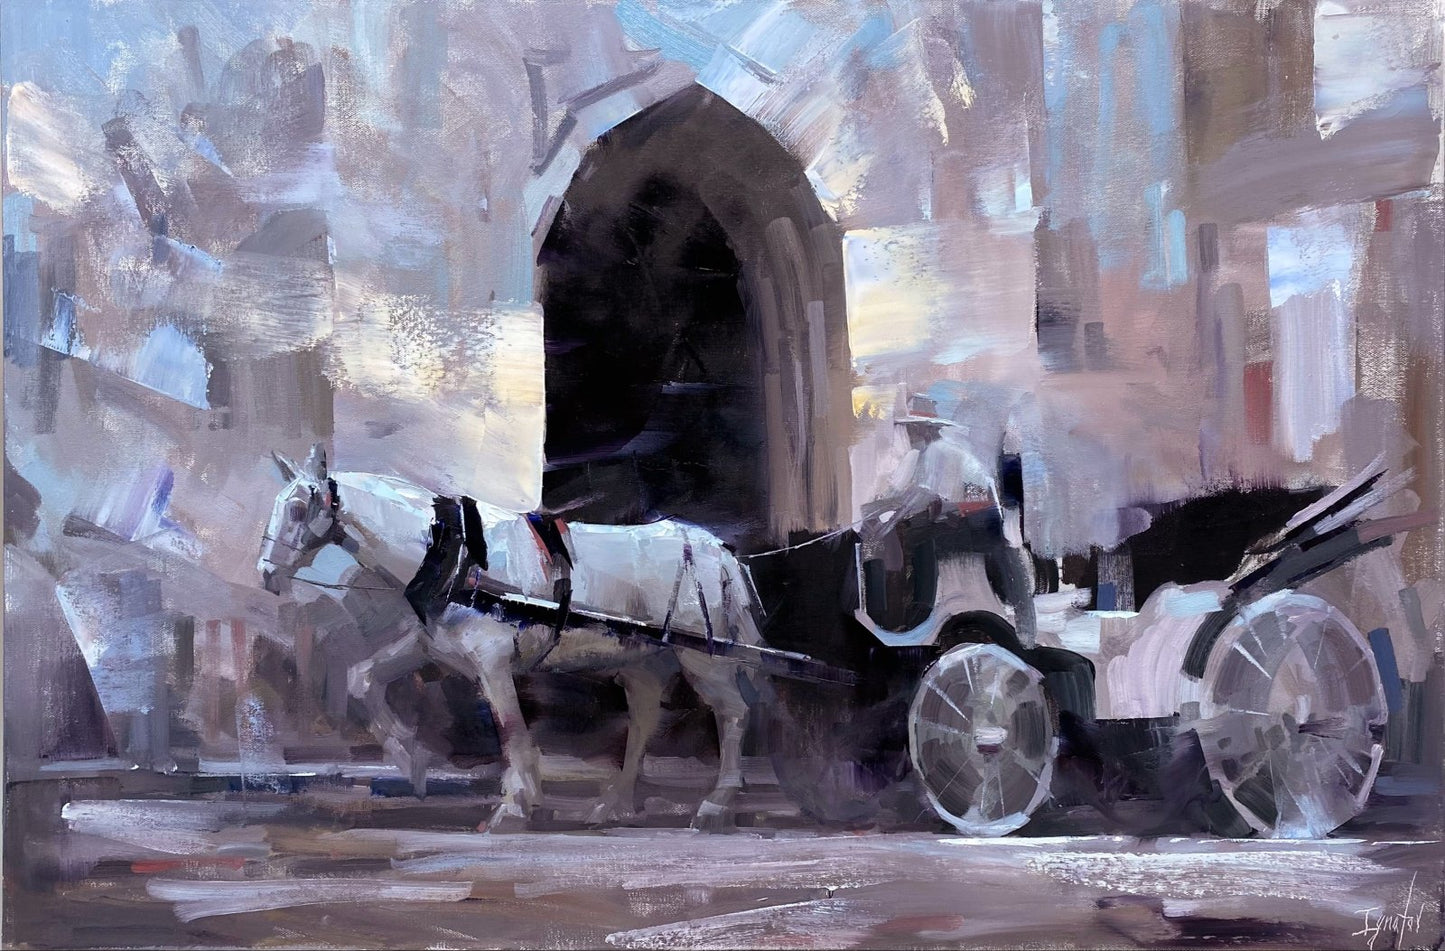 Whispers of Old Charleston by Ignat Ignatov at LePrince Galleries